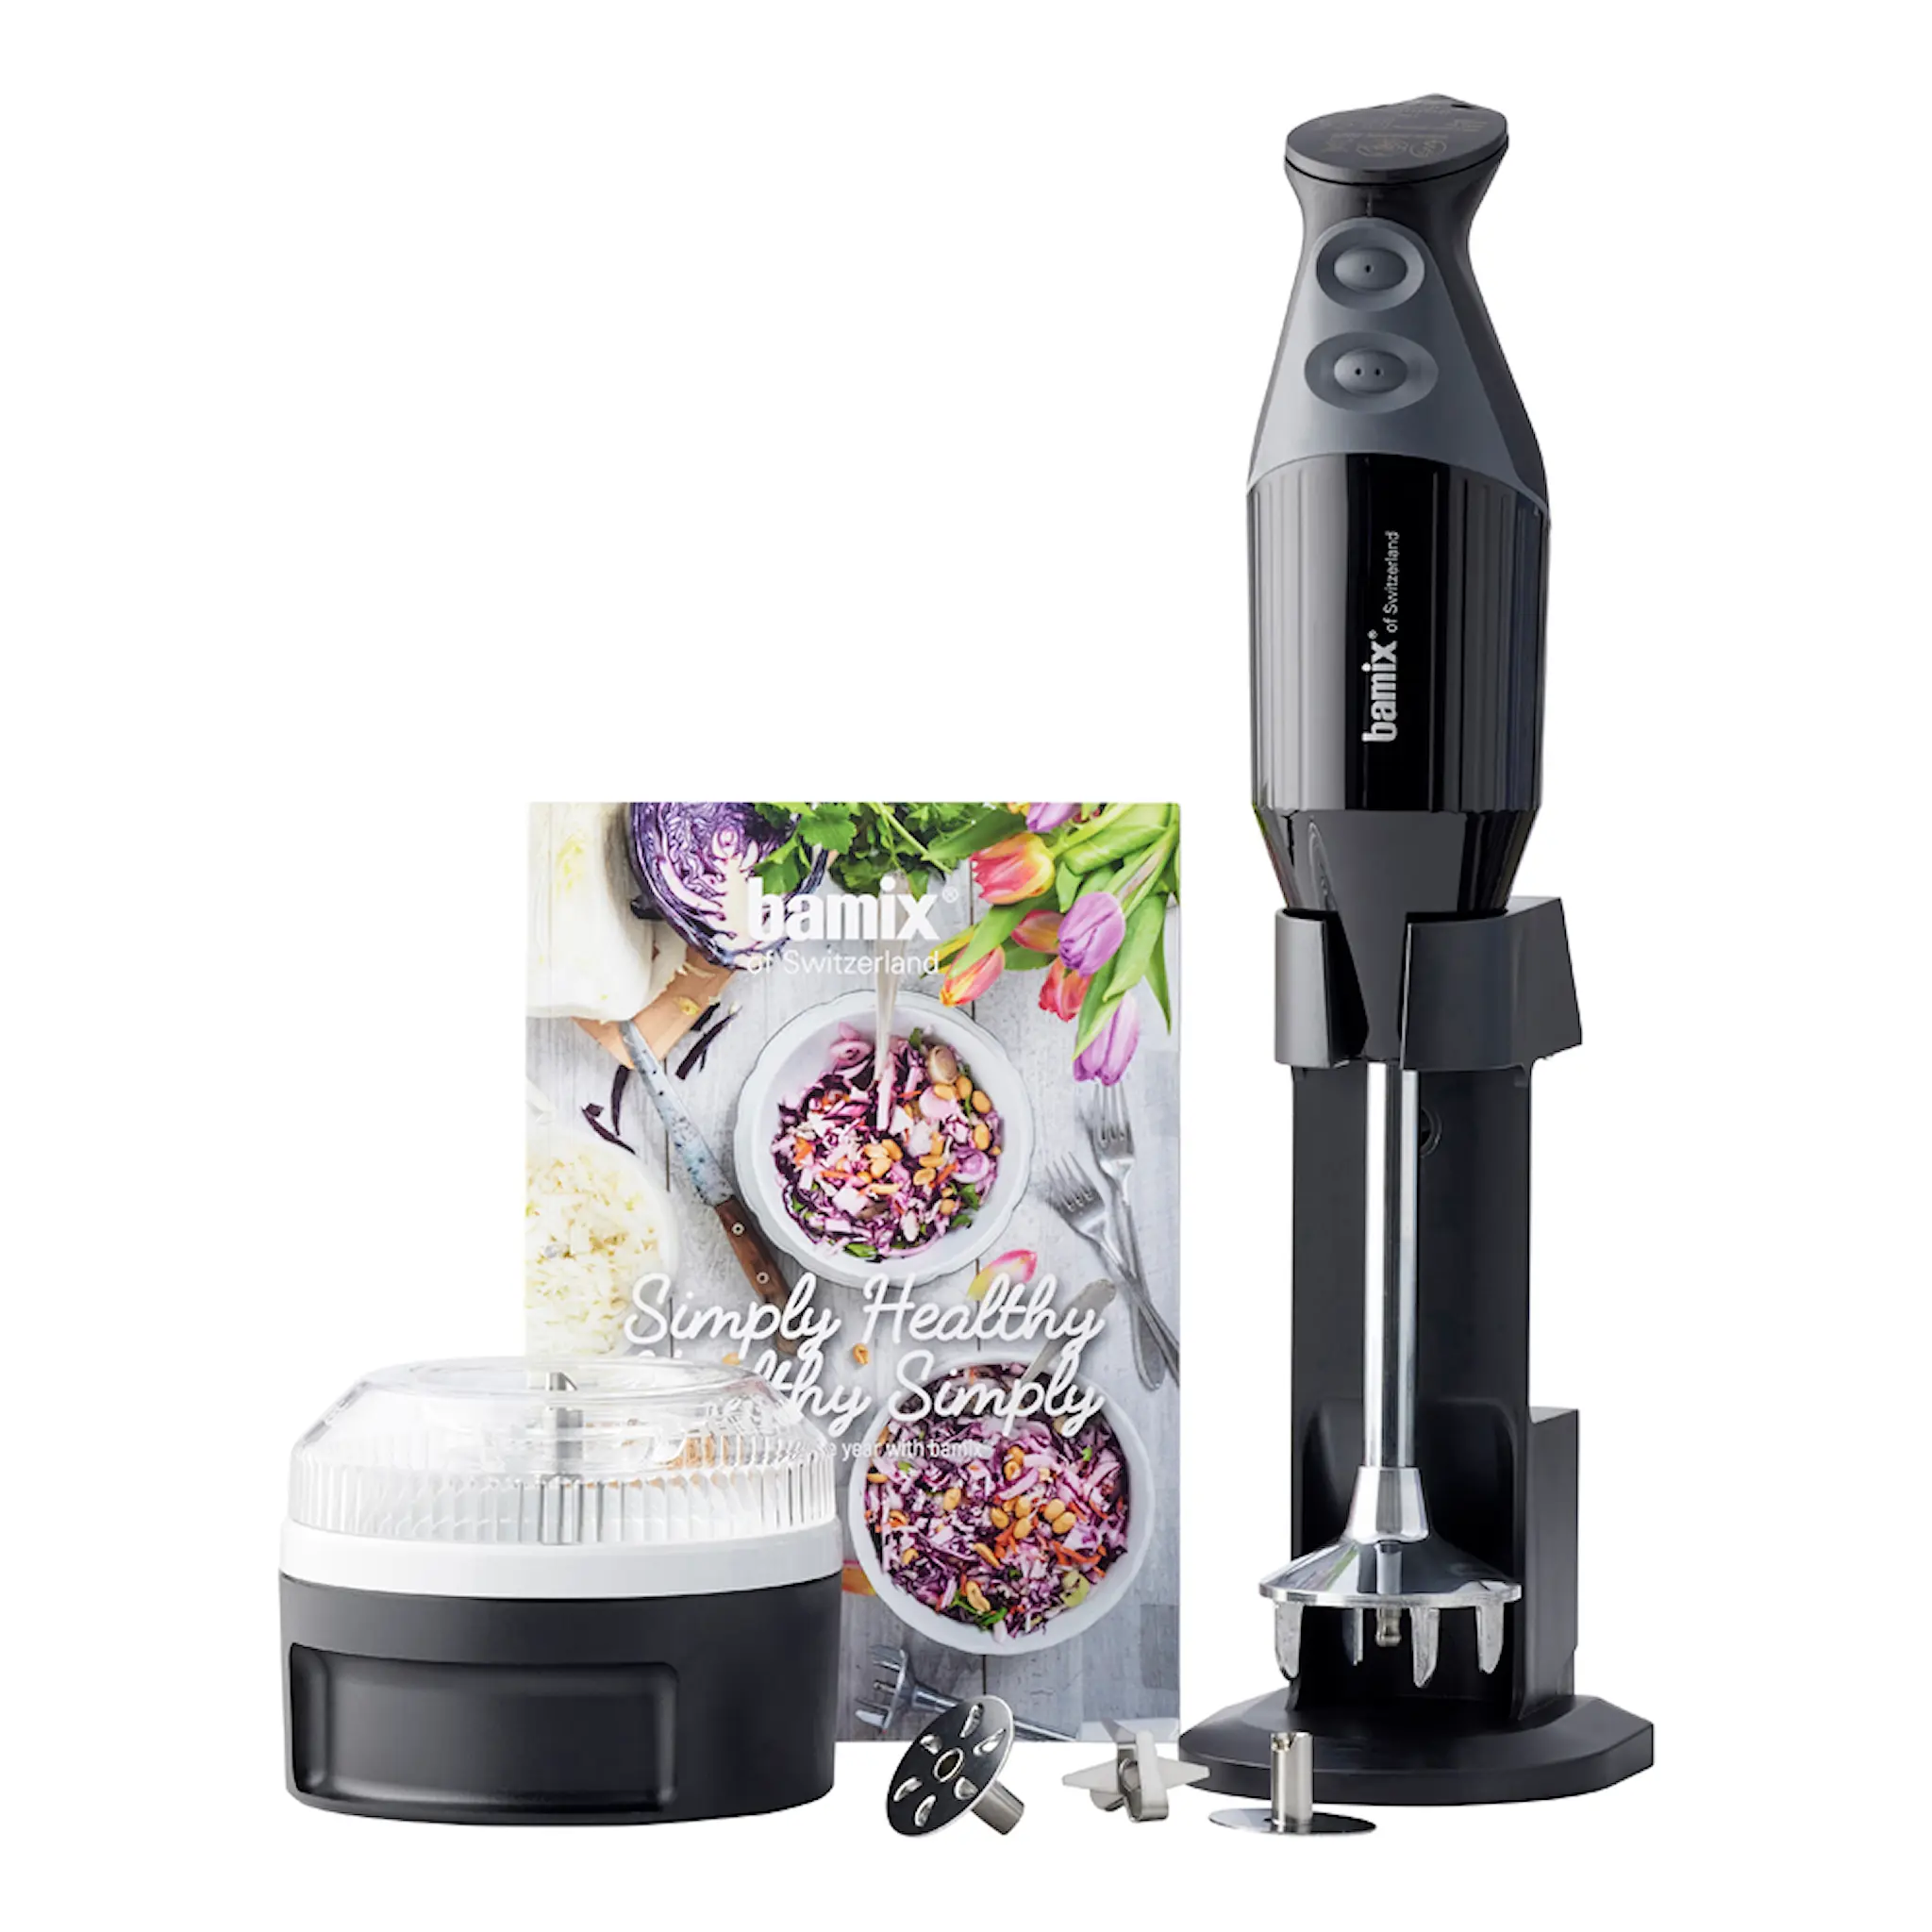 Bamix Bamix stavmikser simply healthy 200W